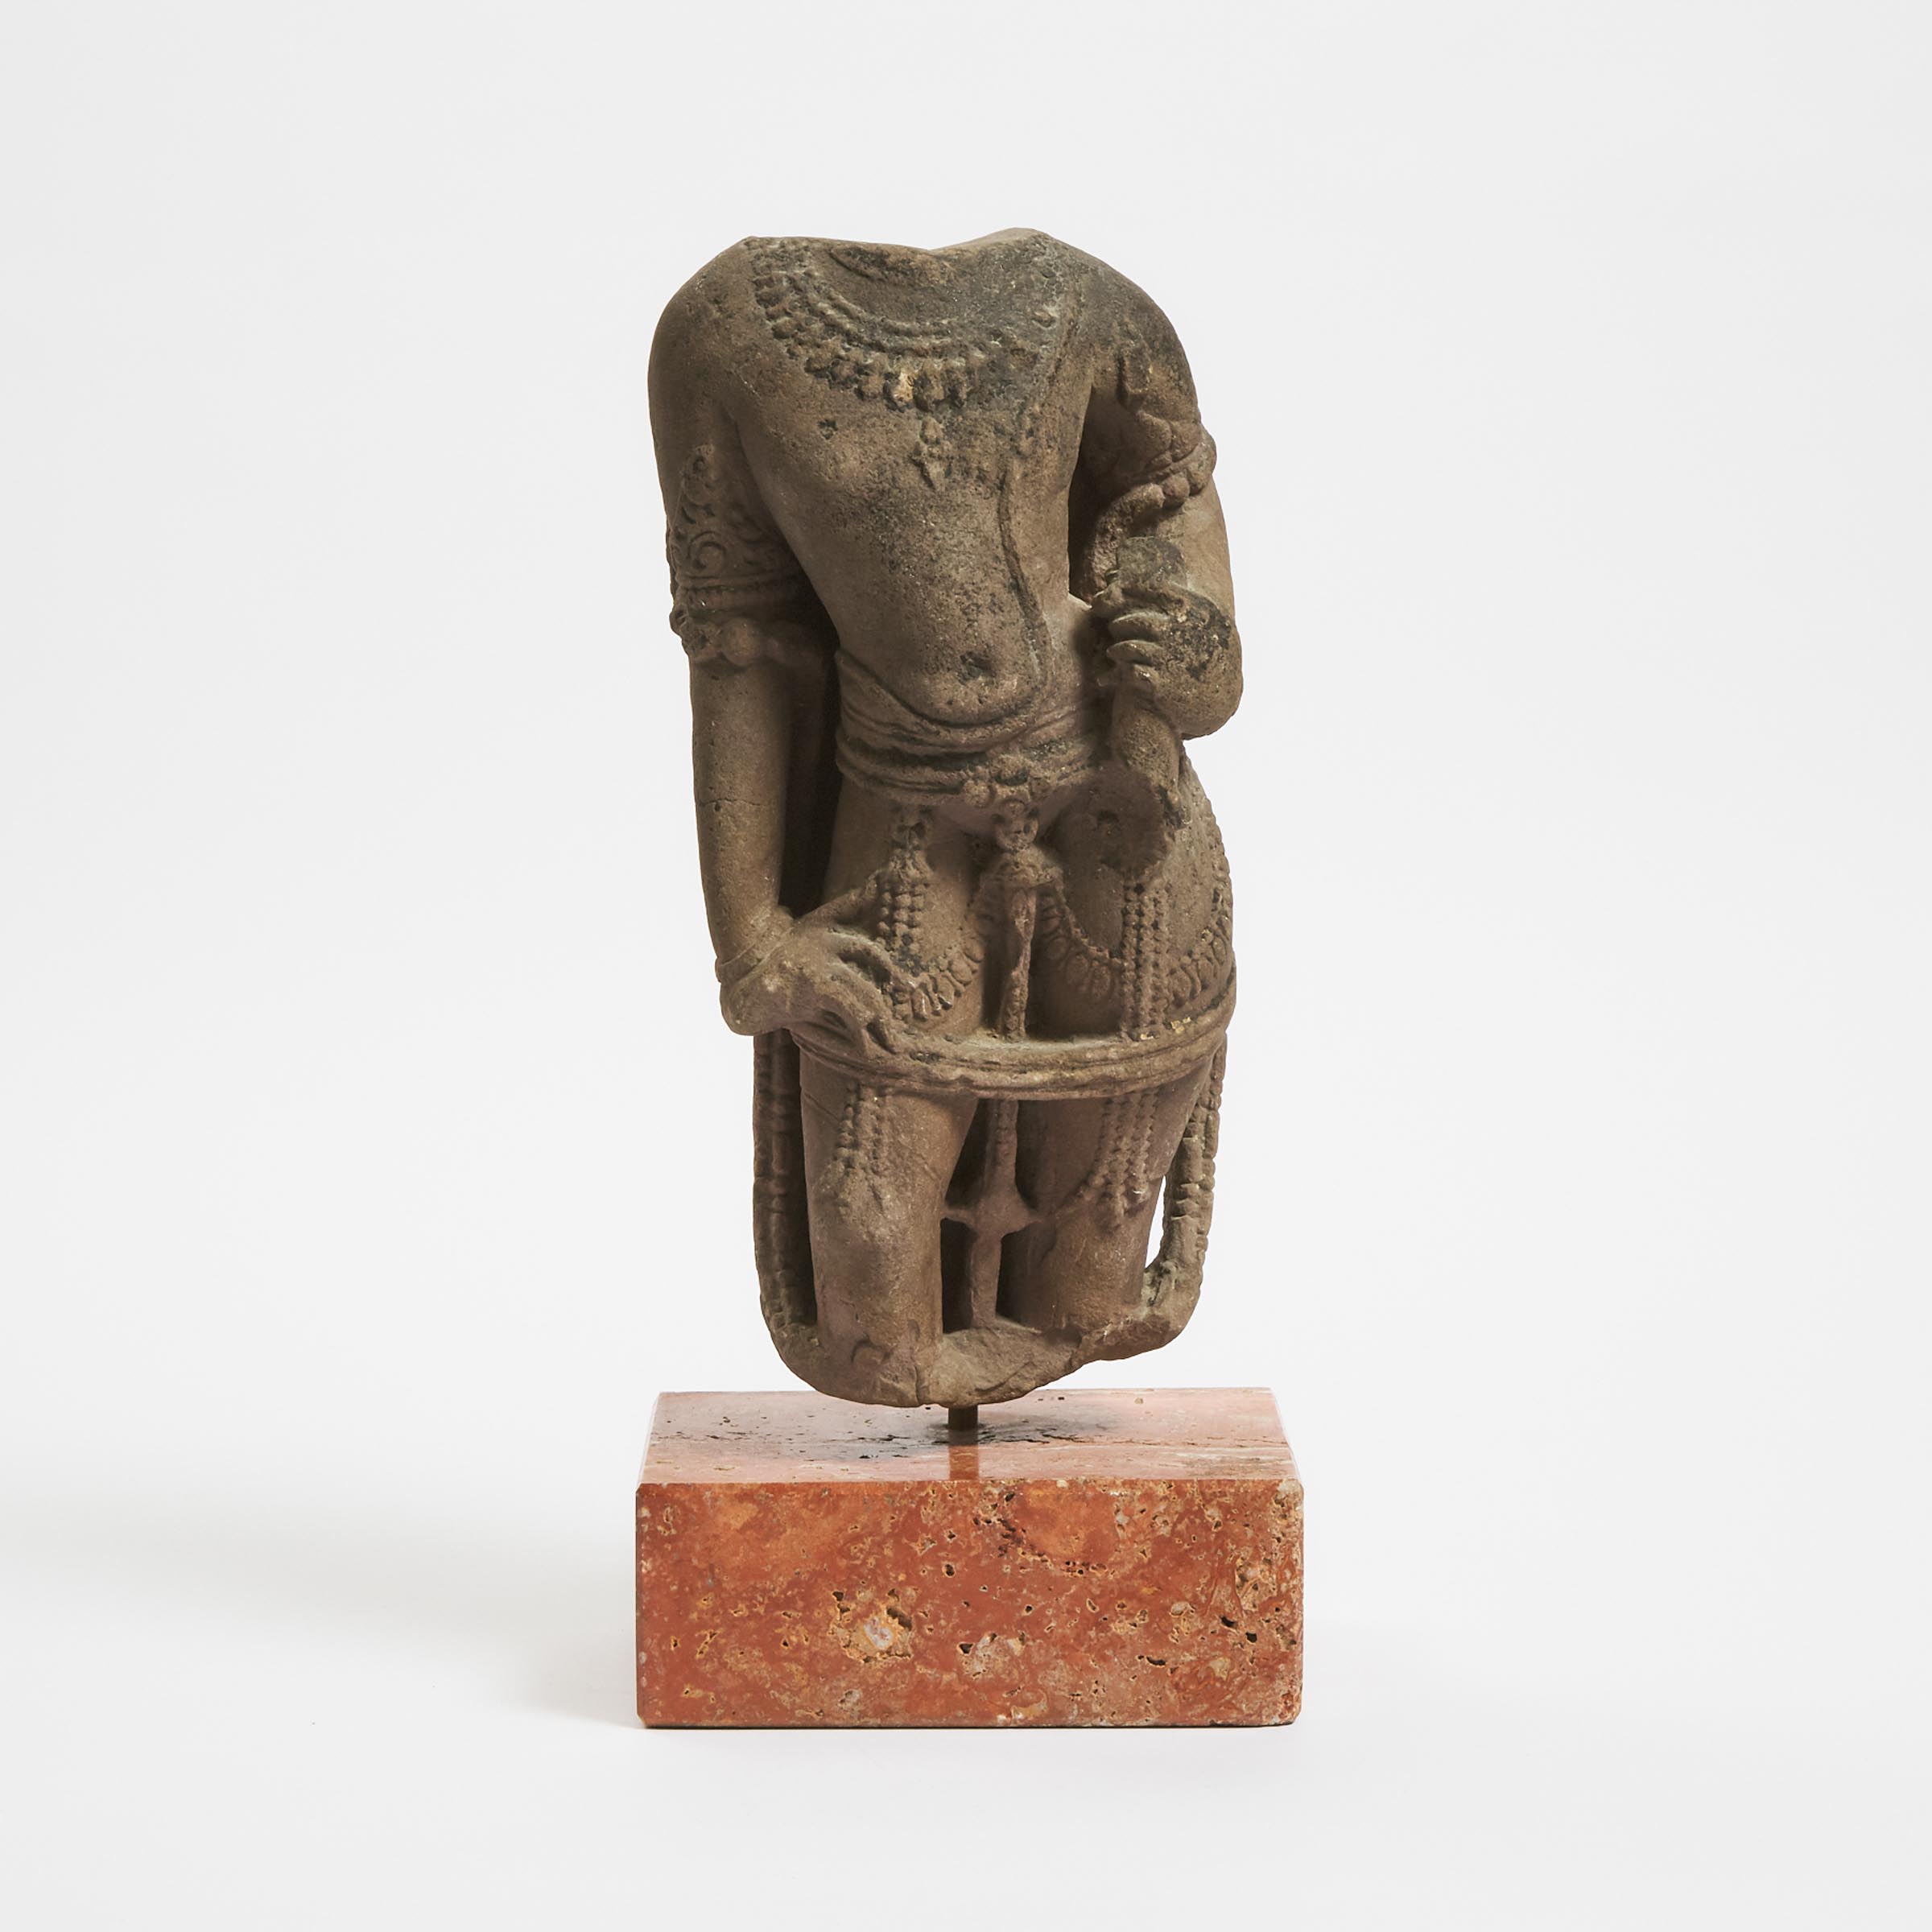 A Stone Torso of a Male Deity, India, 12th Century or Later